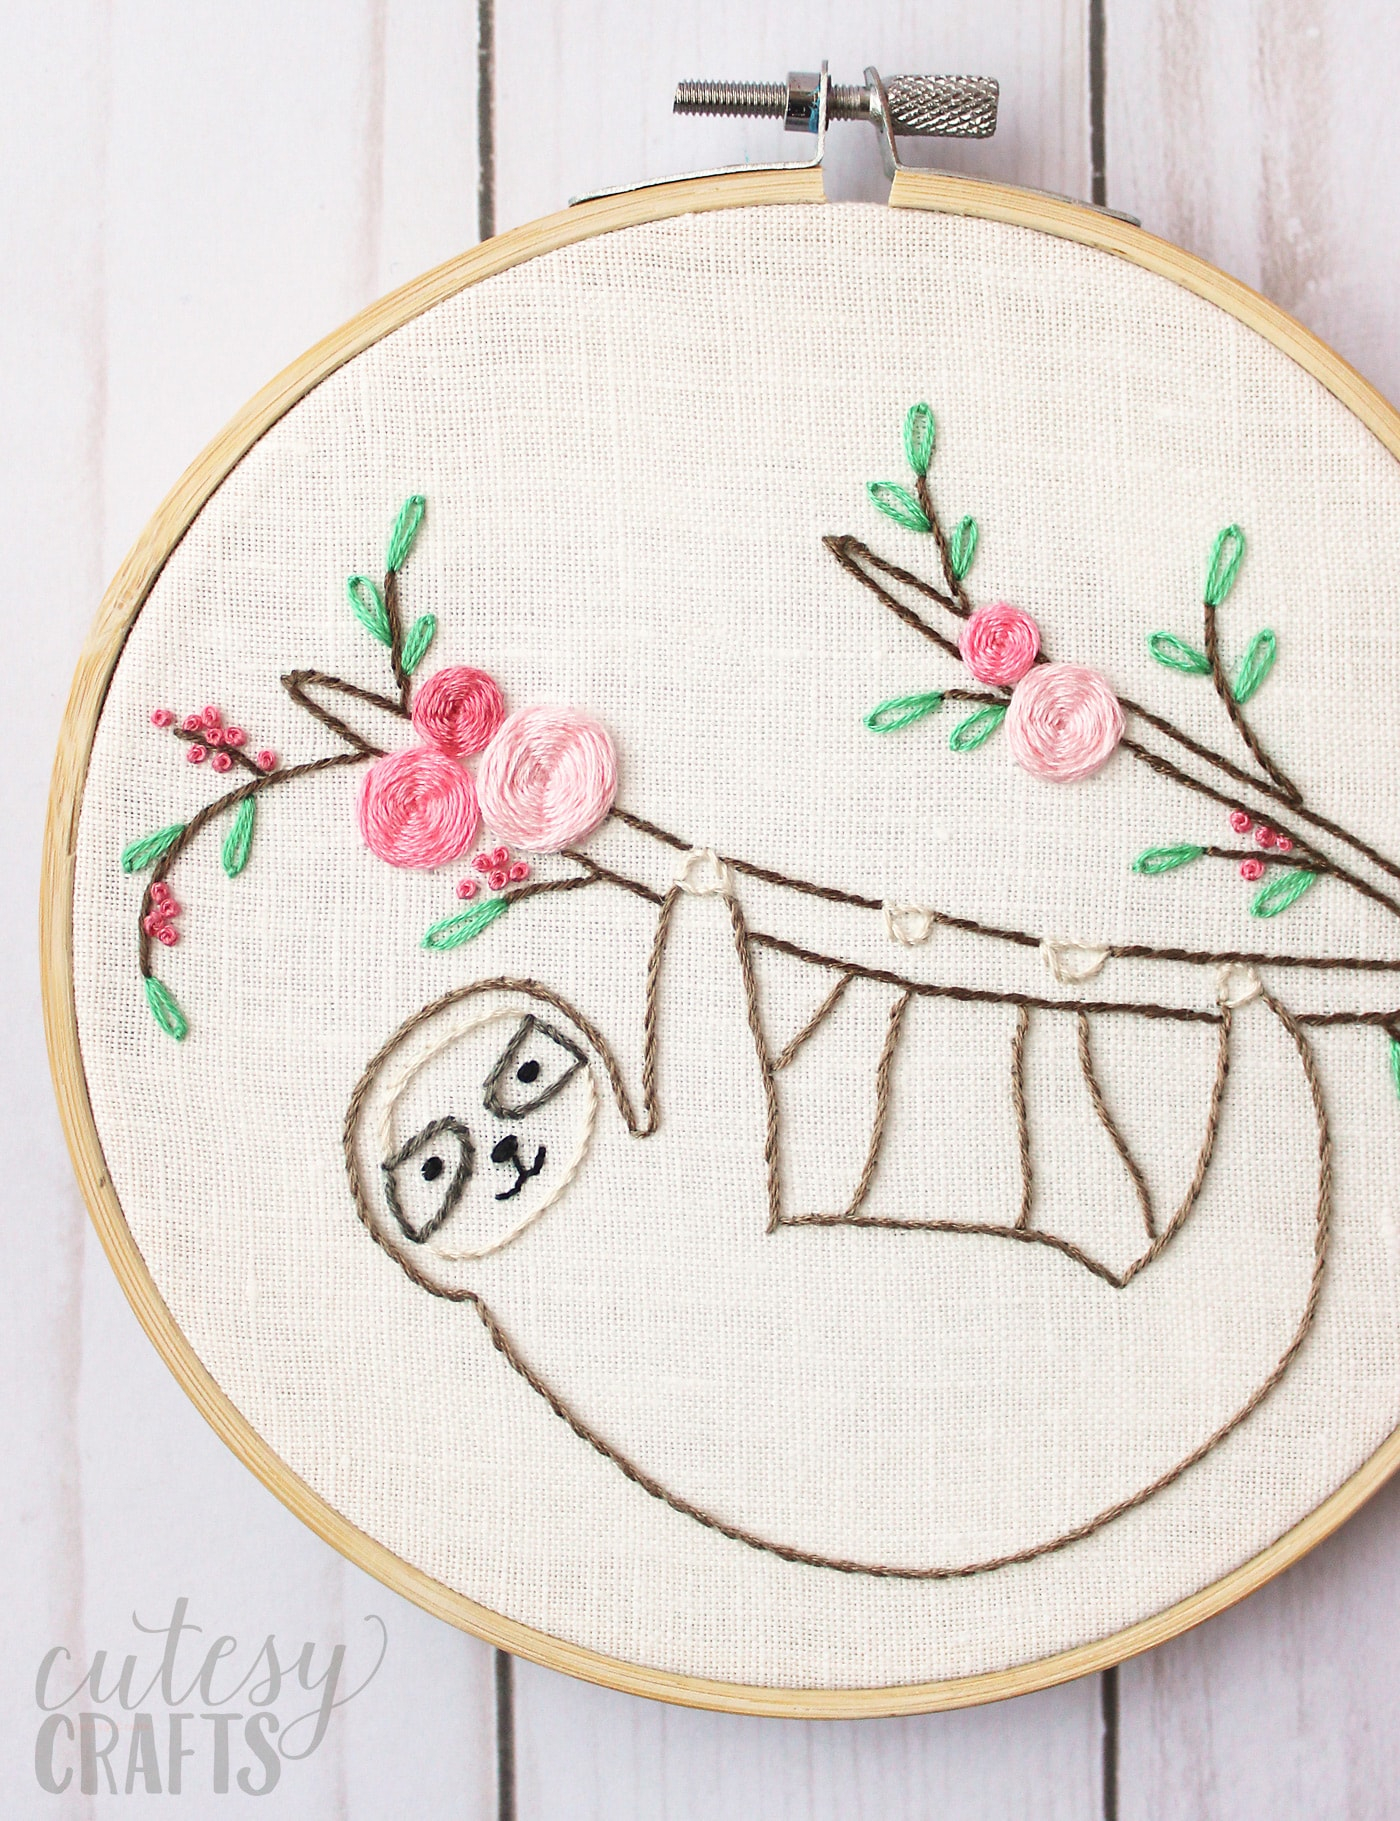 Embroidery Free Patterns Adorable Sloth Hand Embroidery Pattern The Polka Dot Chair